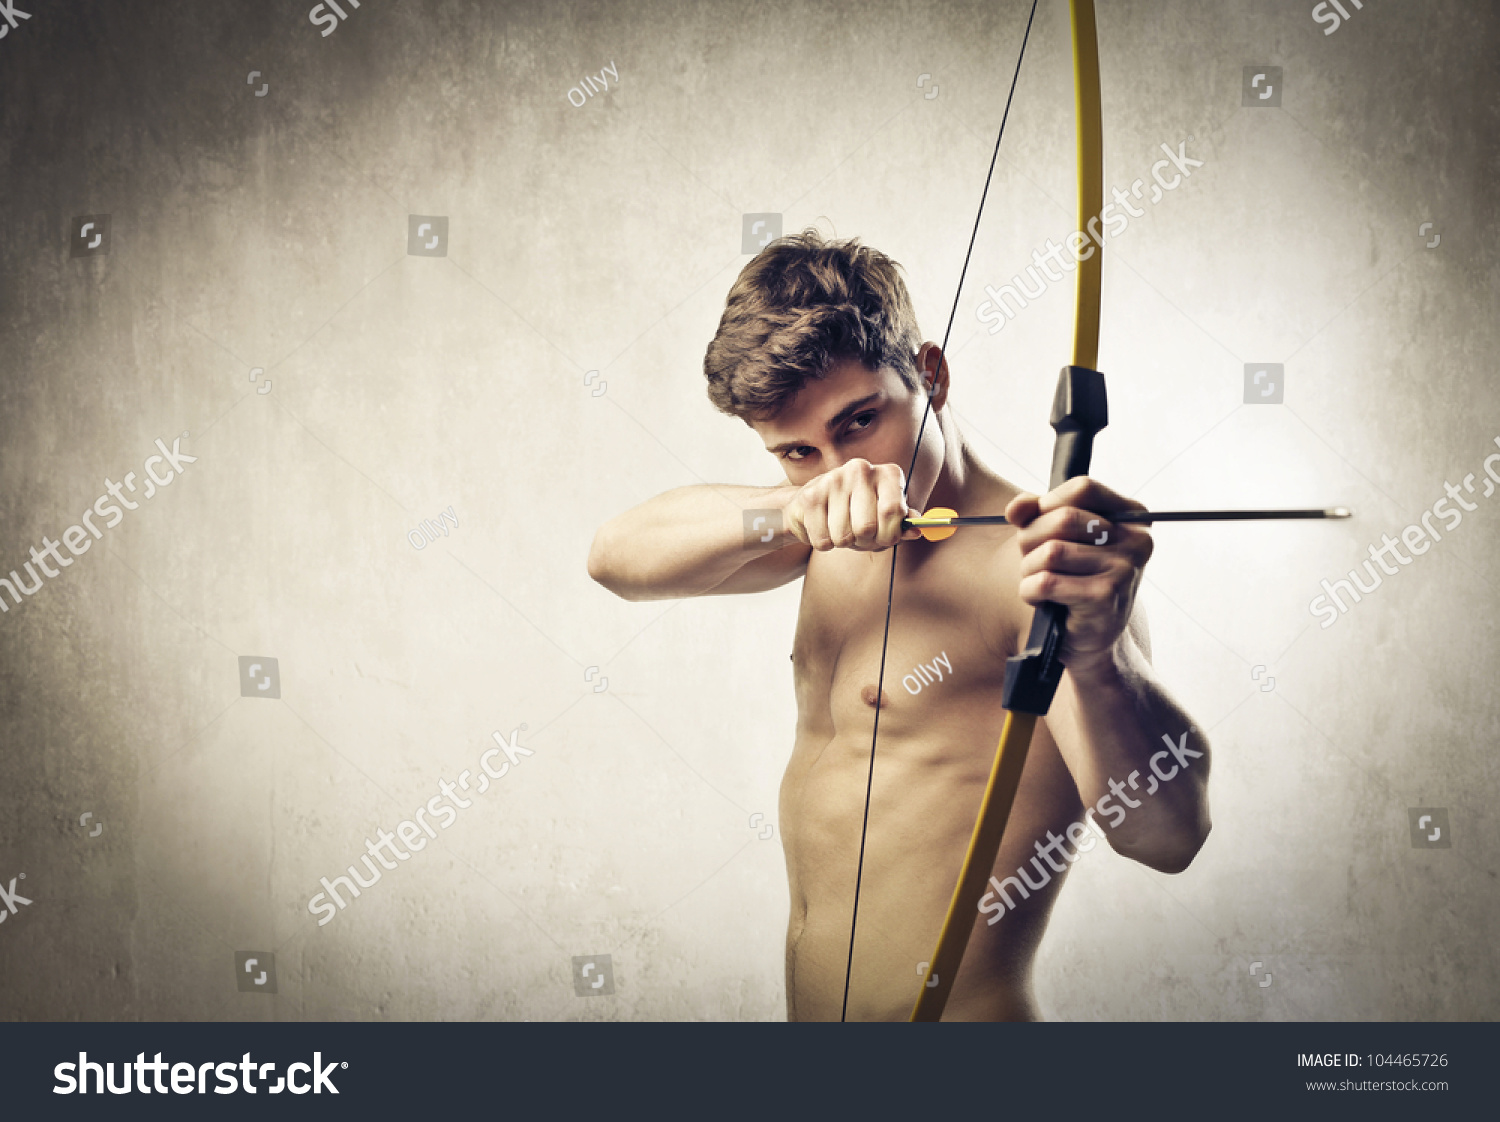 Handsome Bare Chested Young Man Stock Photo 121634140 